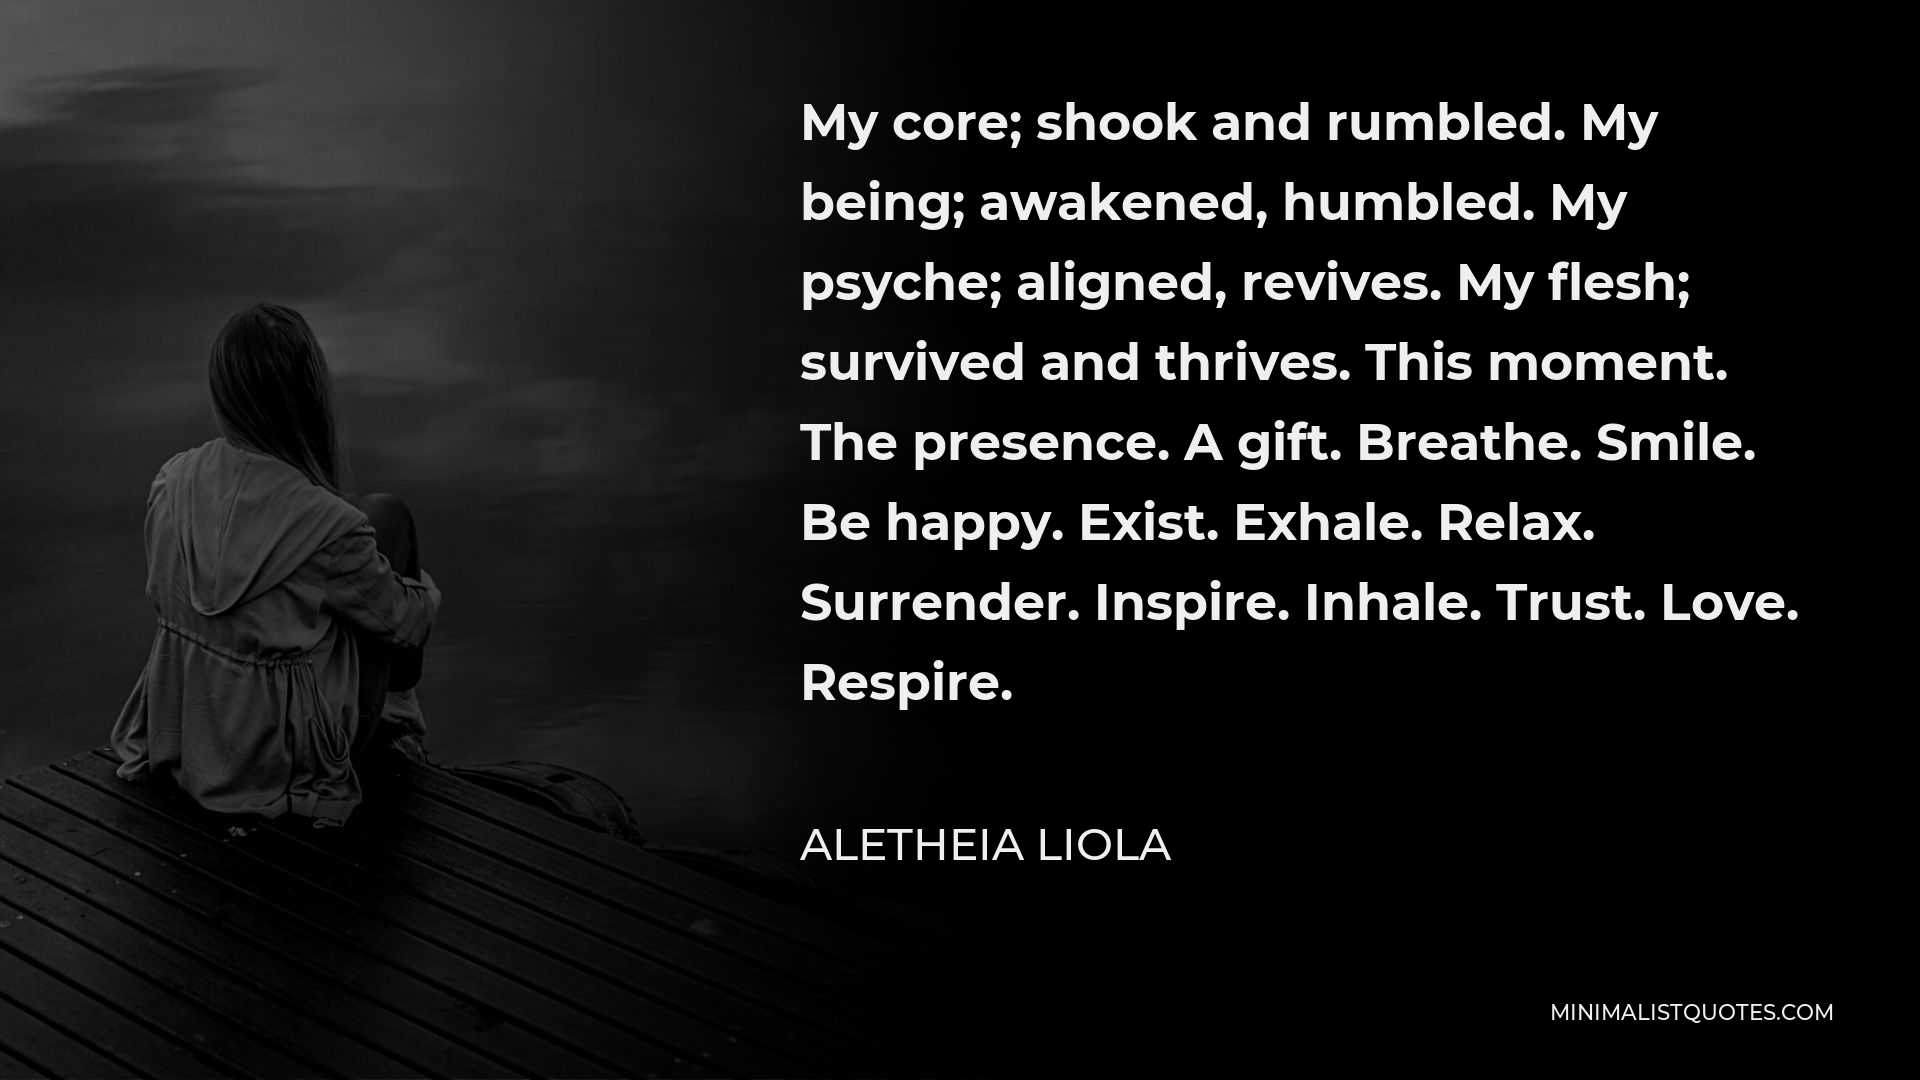 Aletheia Liola Quote - My core; shook and rumbled. My being; awakened, humbled. My psyche; aligned, revives. My flesh; survived and thrives. This moment. The presence. A gift. Breathe. Smile. Be happy. Exist. Exhale. Relax. Surrender. Inspire. Inhale. Trust. Love. Respire.